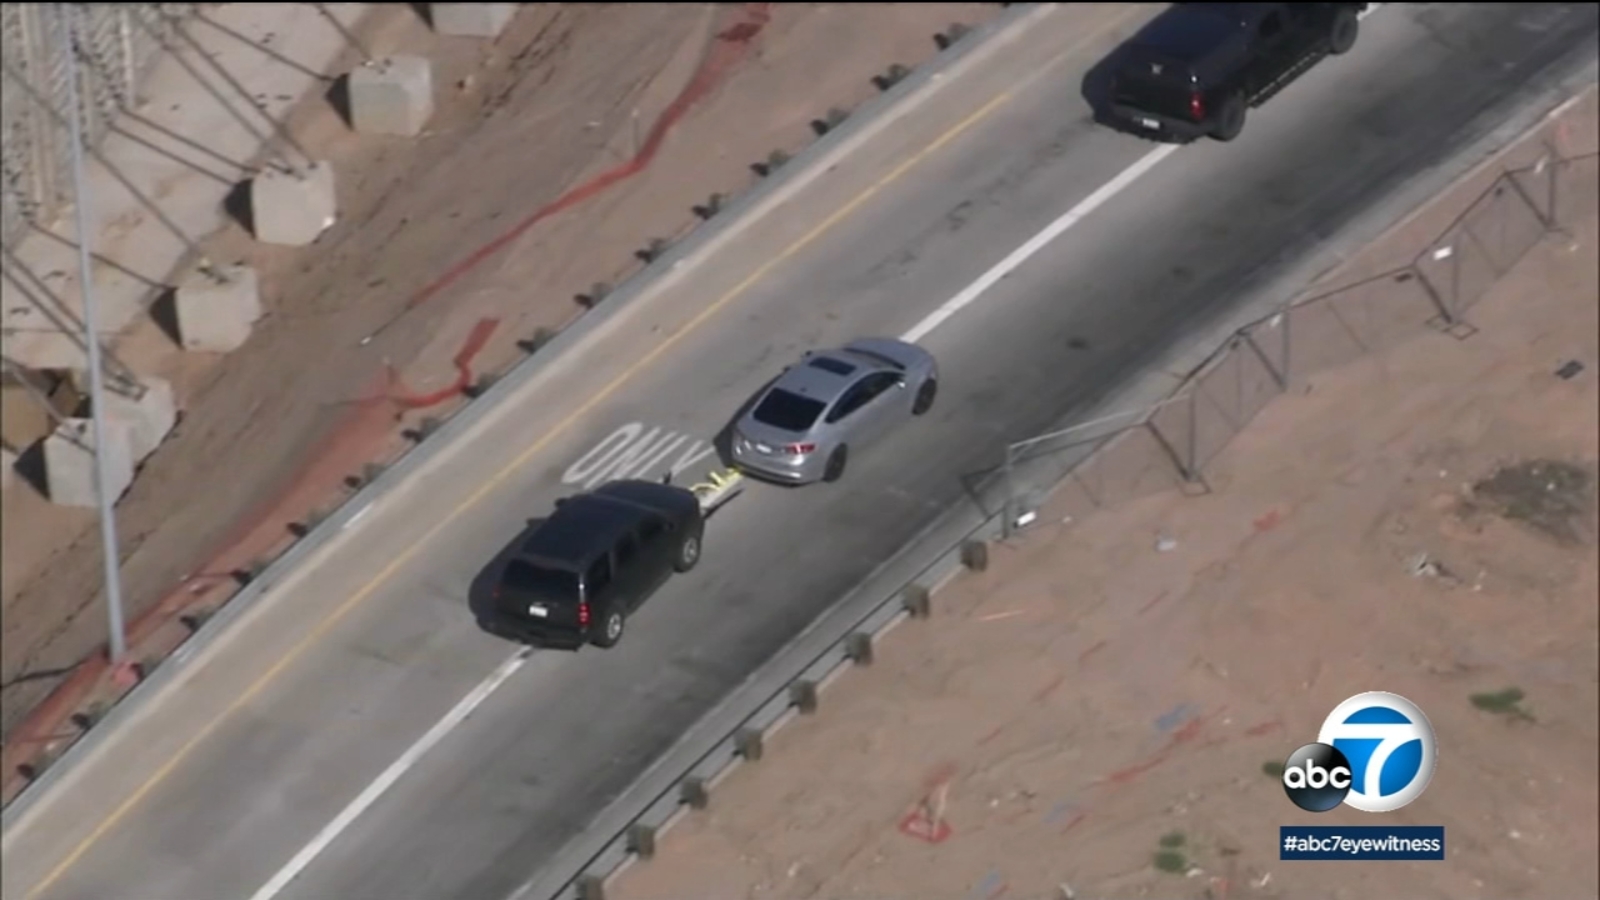 Phoenix pursuit: Police deploy unexpected technology to end chase in Arizona